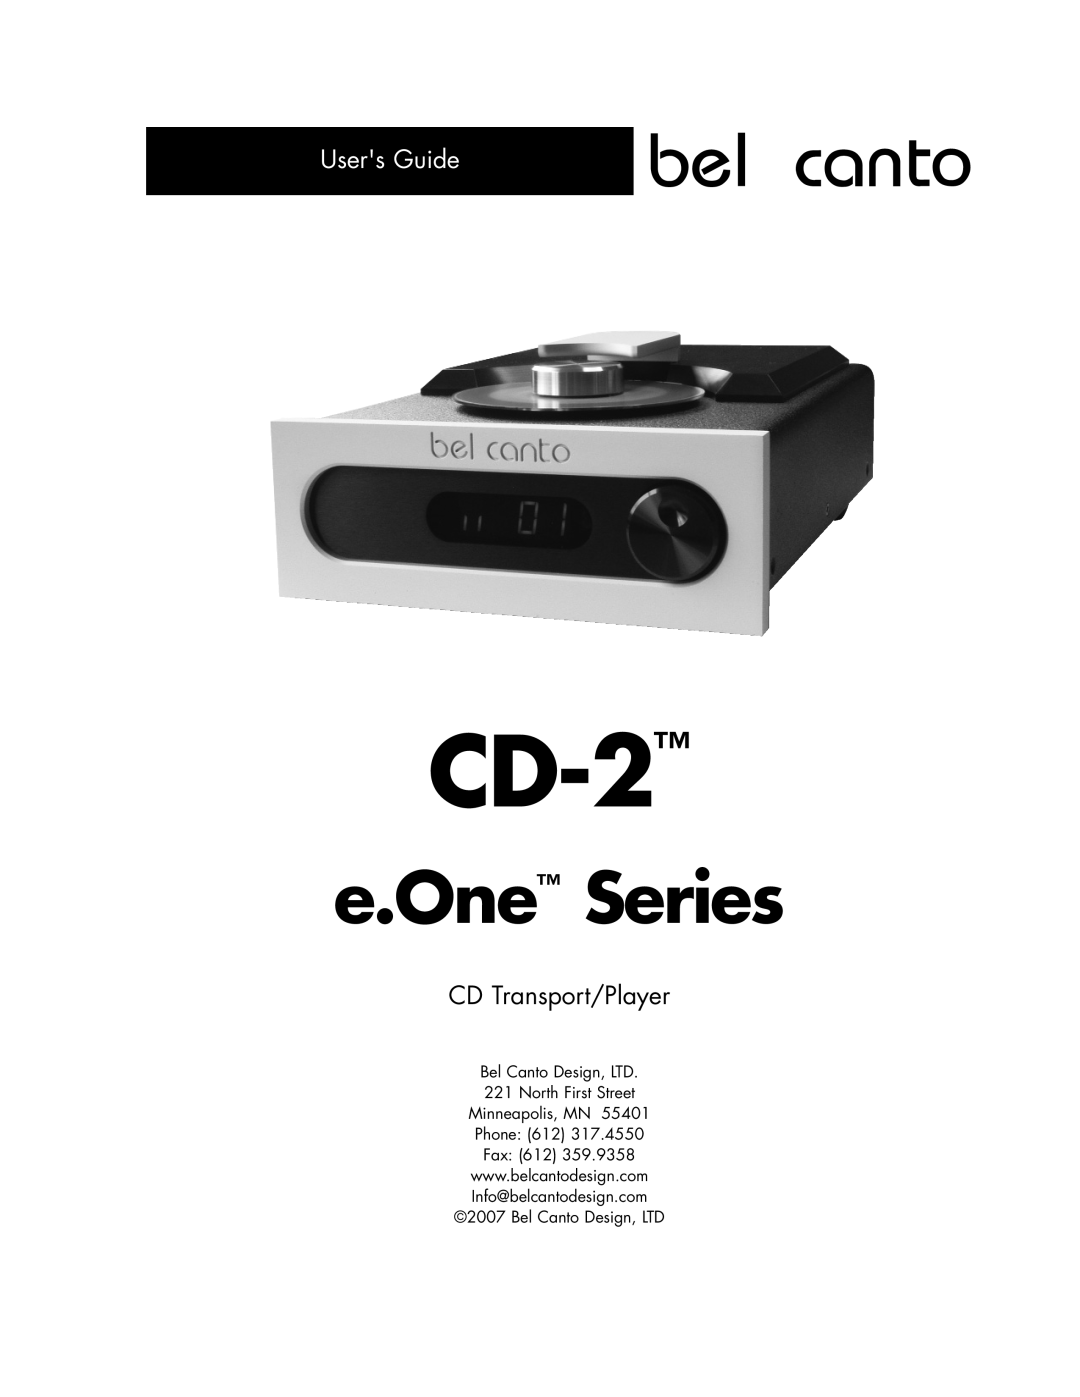 Bel Canto Design CD-2 manual e.One Series, Users Guide, bel canto, CD Transport/Player 